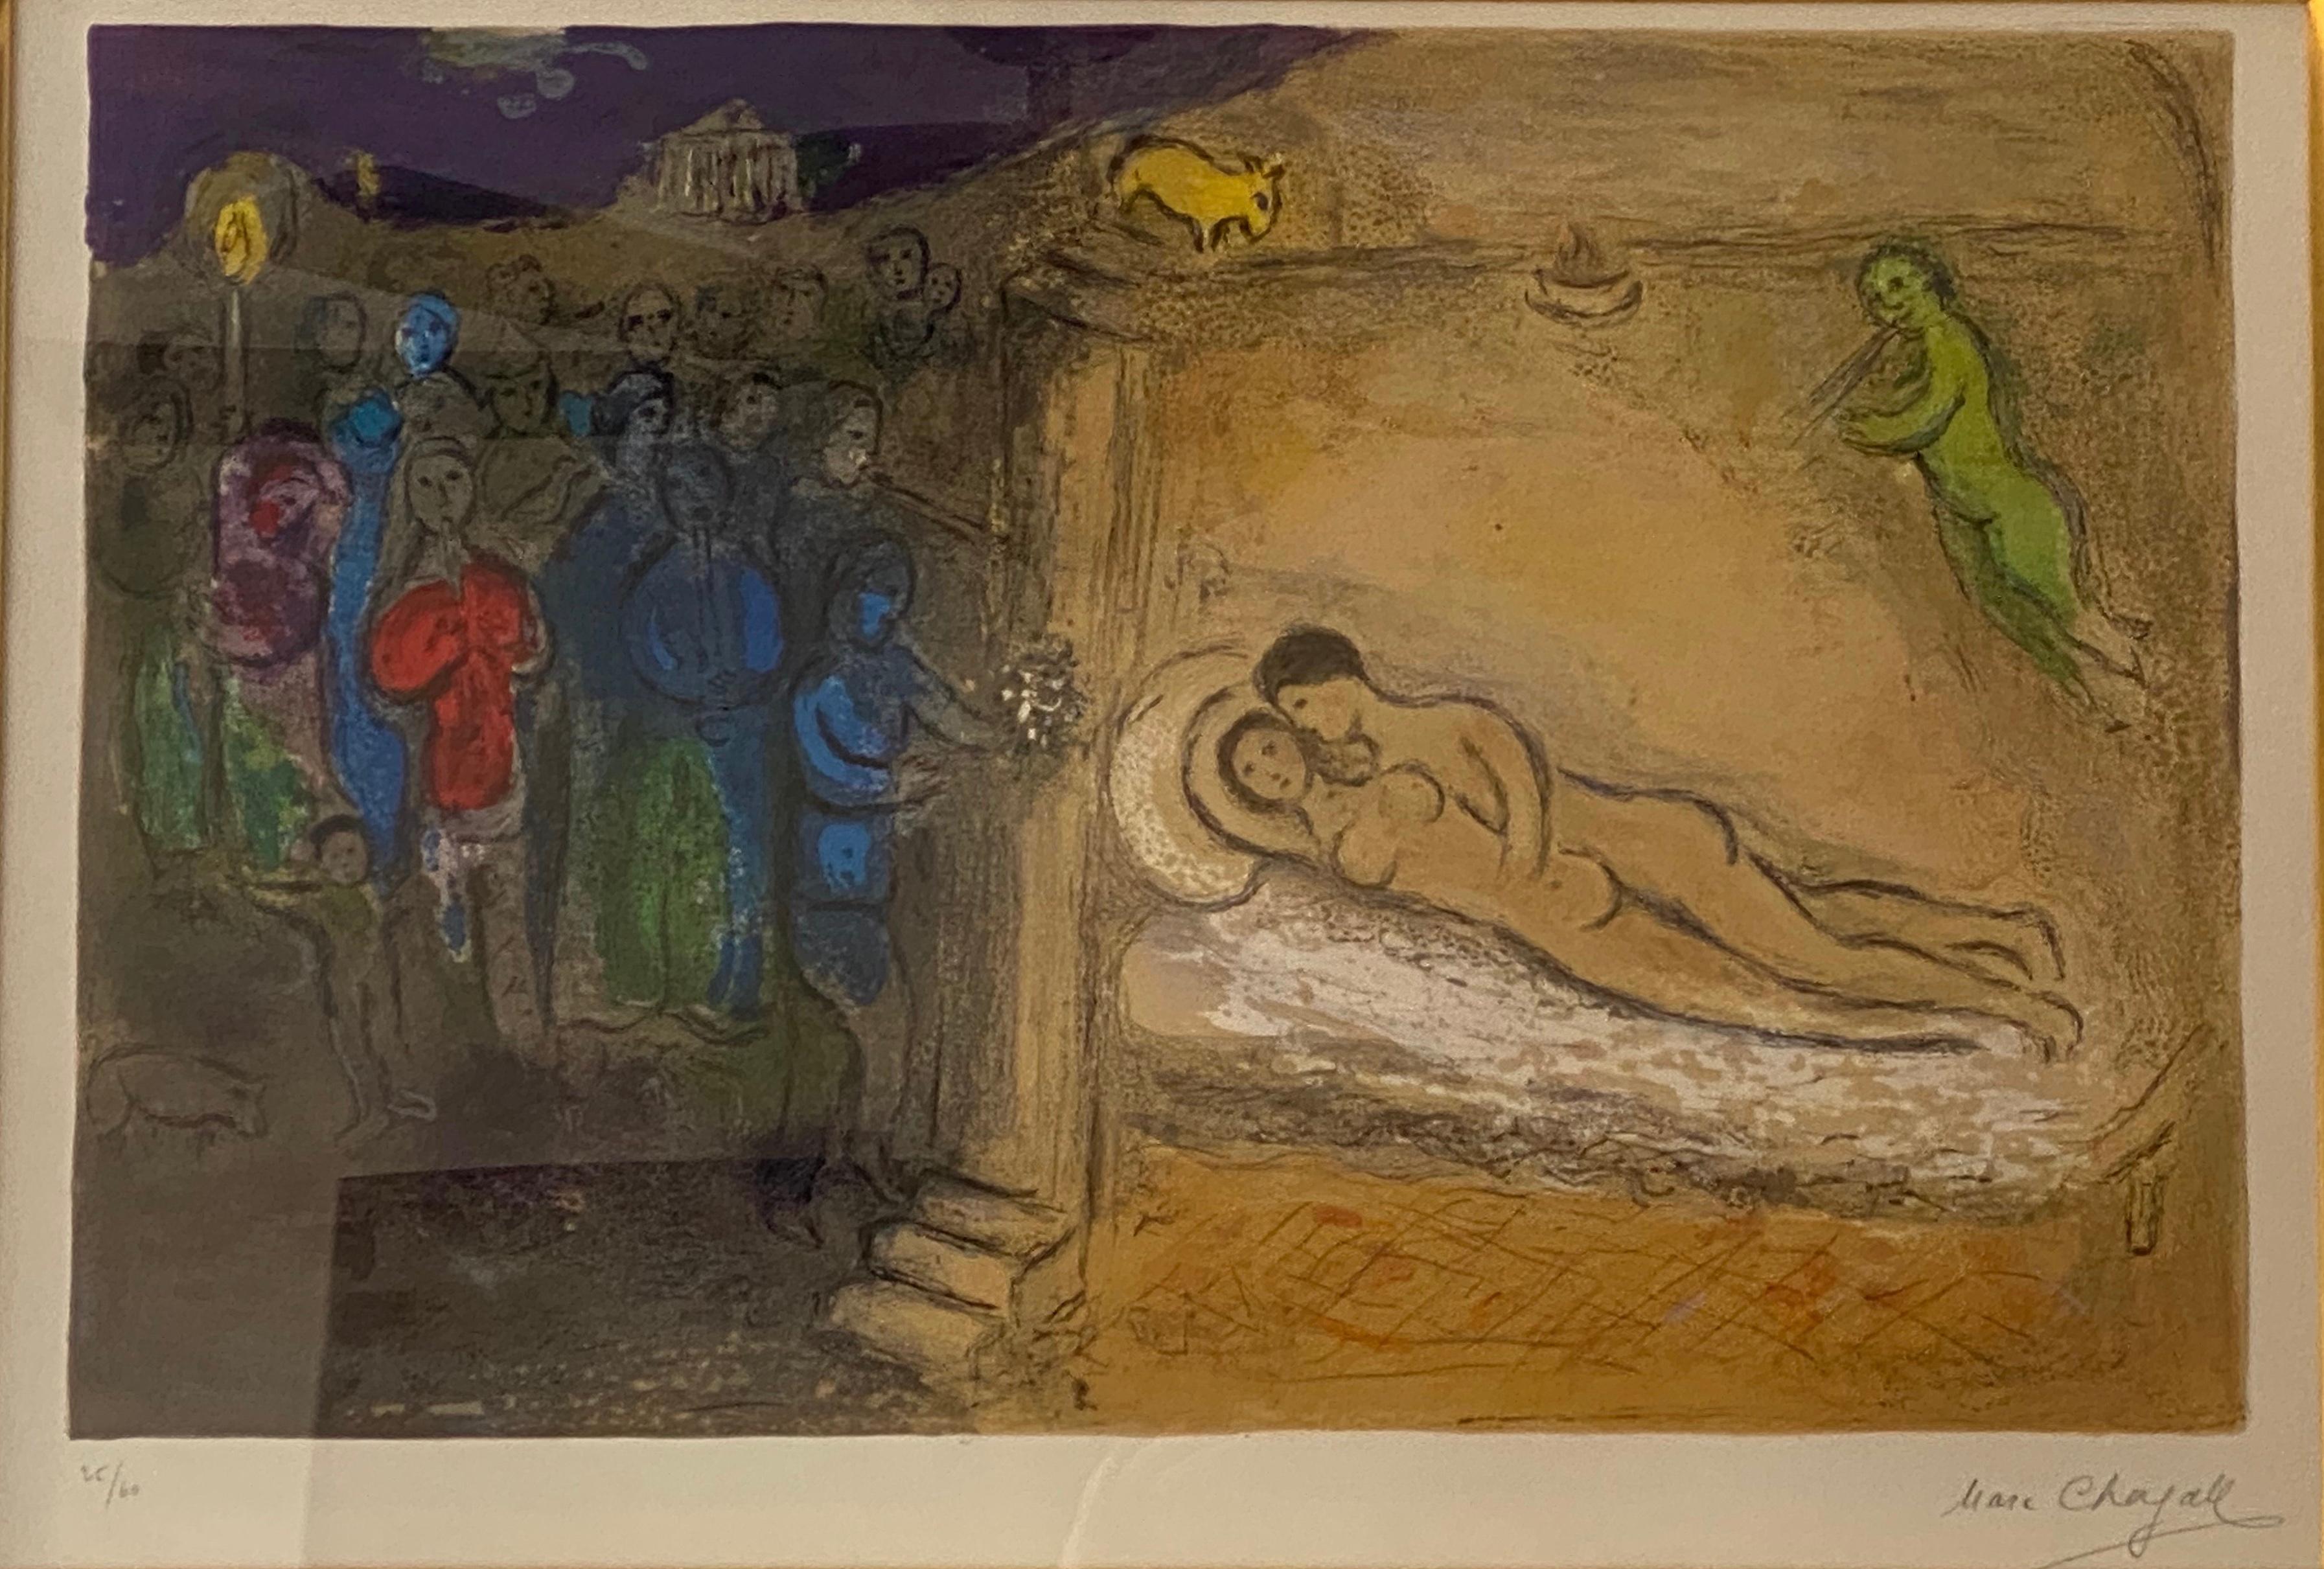 This piece is an original lithograph by Marc Chagall created in 1961. It was made to illustrate the book, Daphnis and Chloe, which consists of 42 original lithographs. This illustrated book is considered to be the most important group of graphic